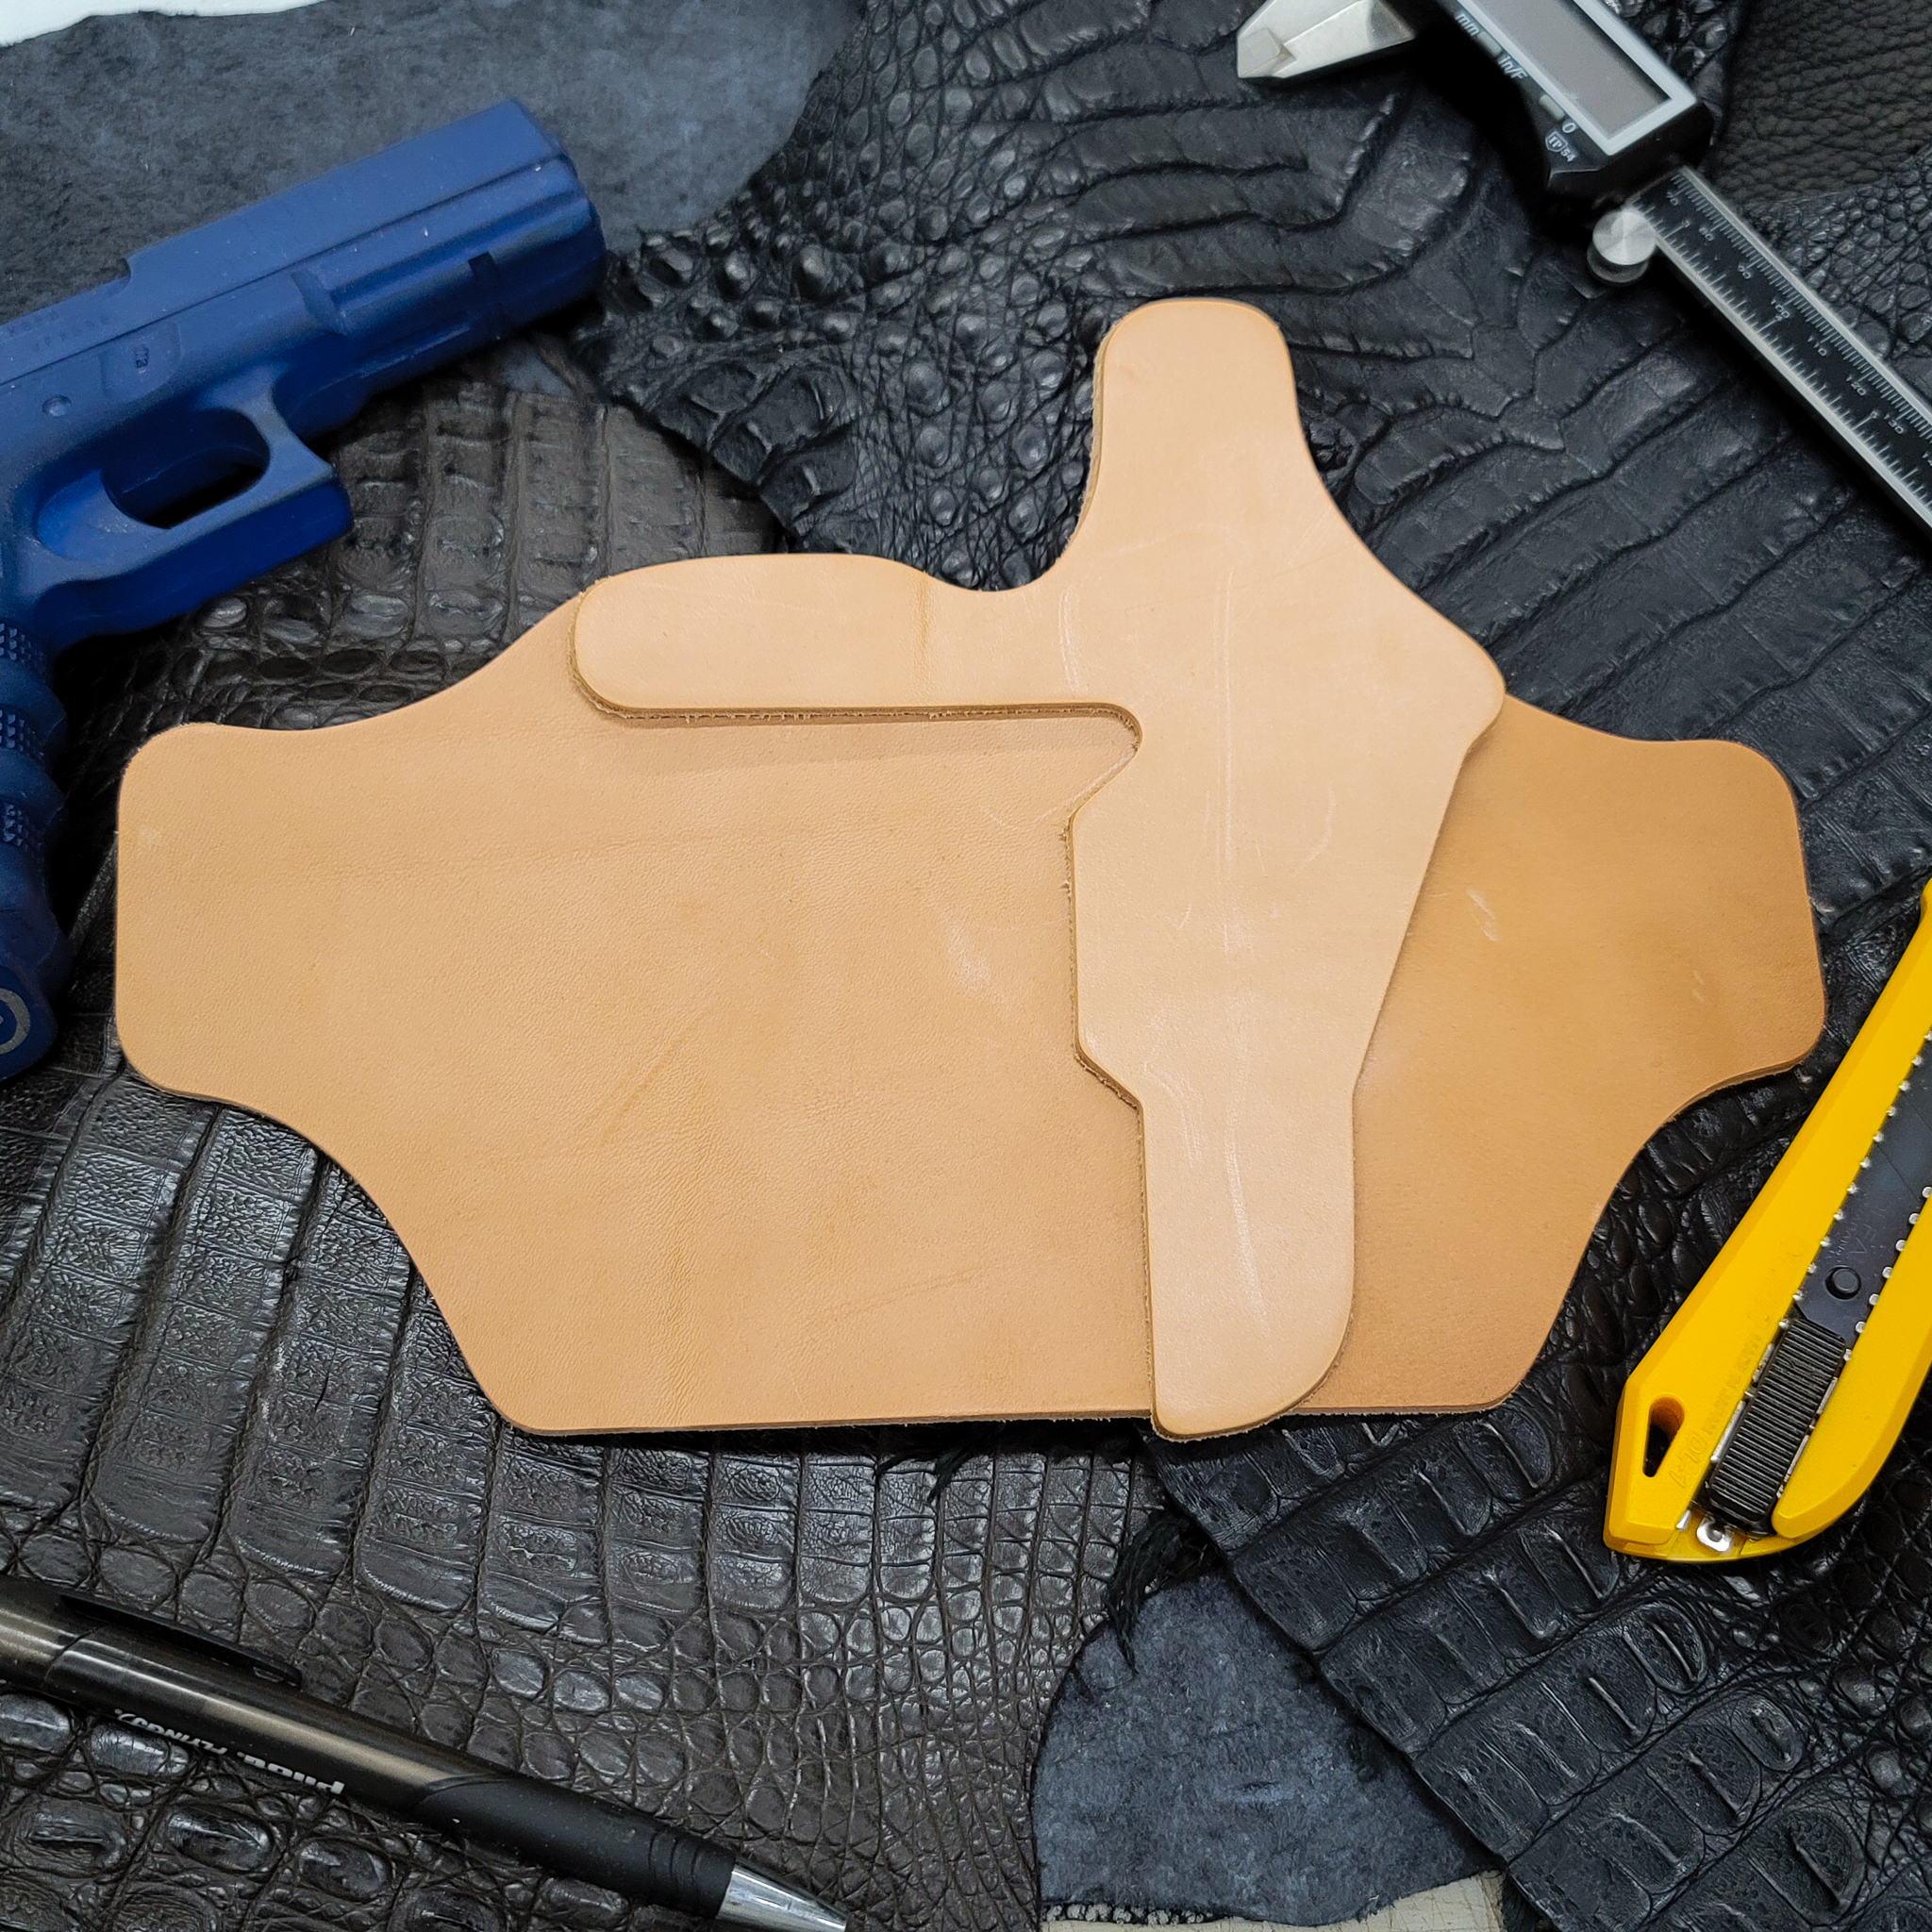 How to Mold, Dye, and Finish an EDC Leather Flatpak Holster Kit